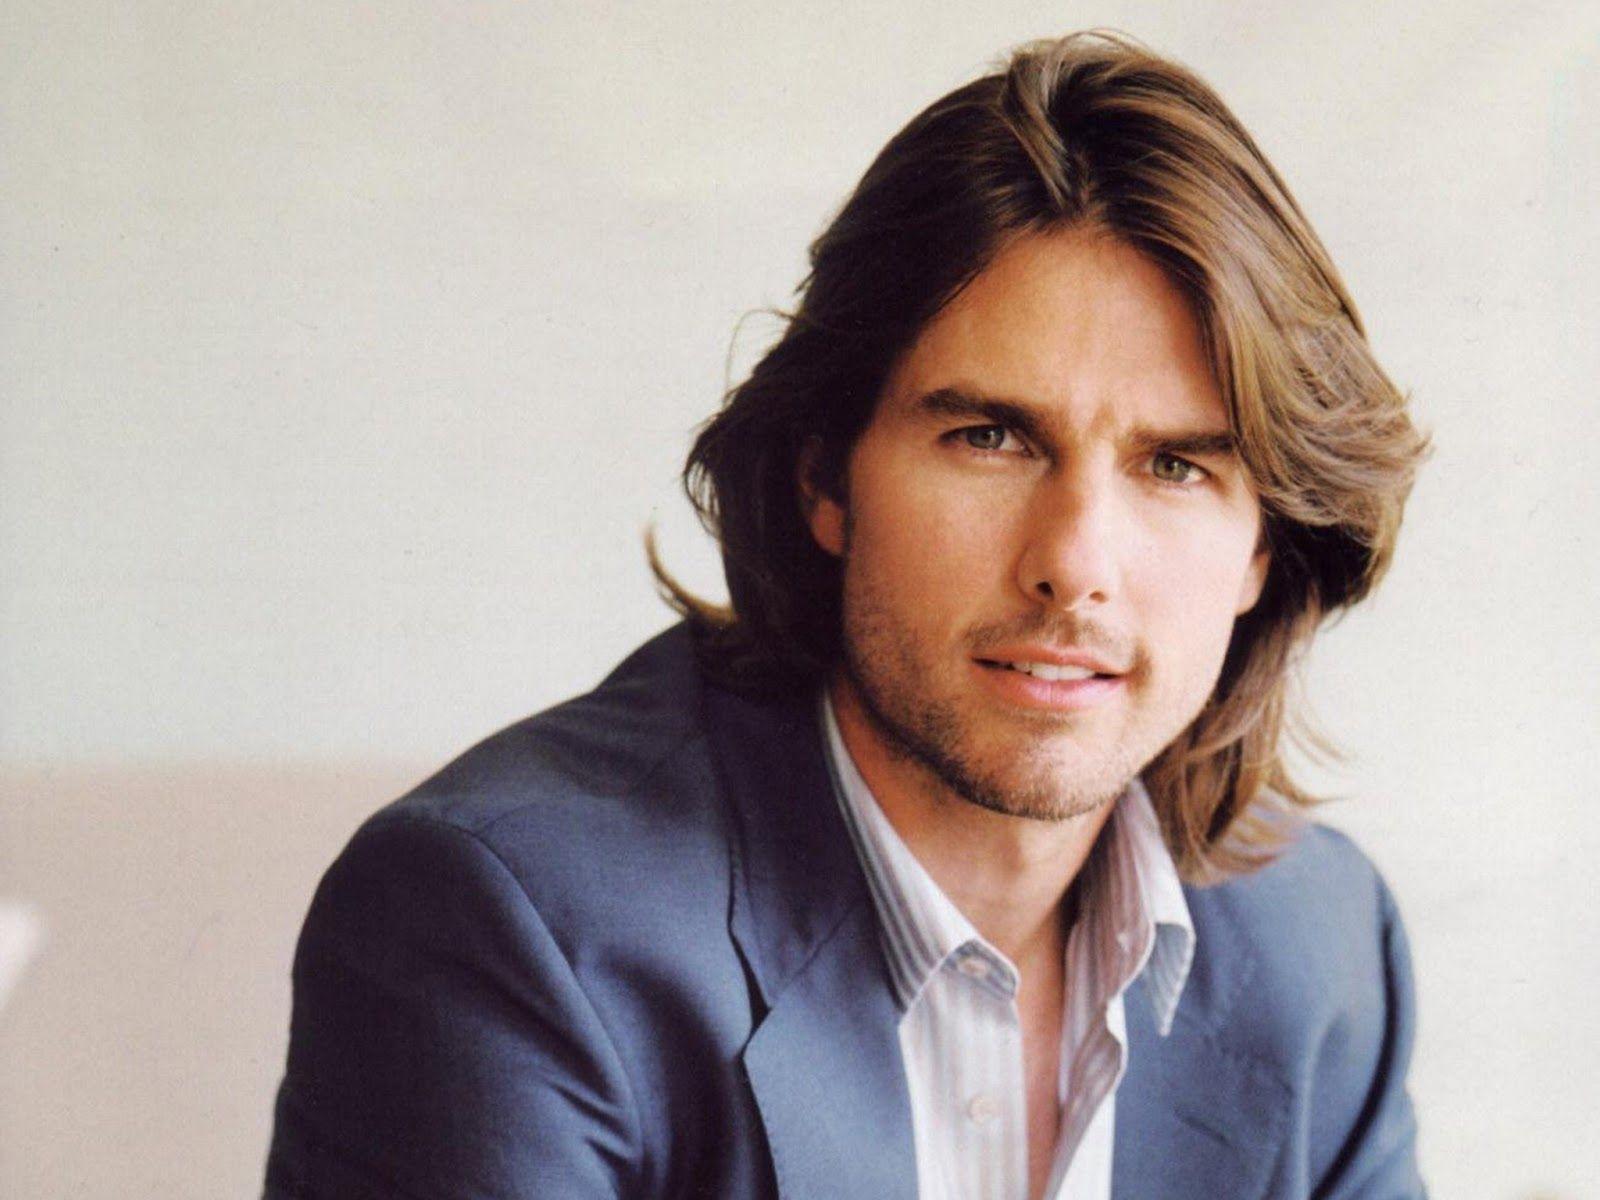 tom cruise high resolution wallpaper 1080p free download 2013